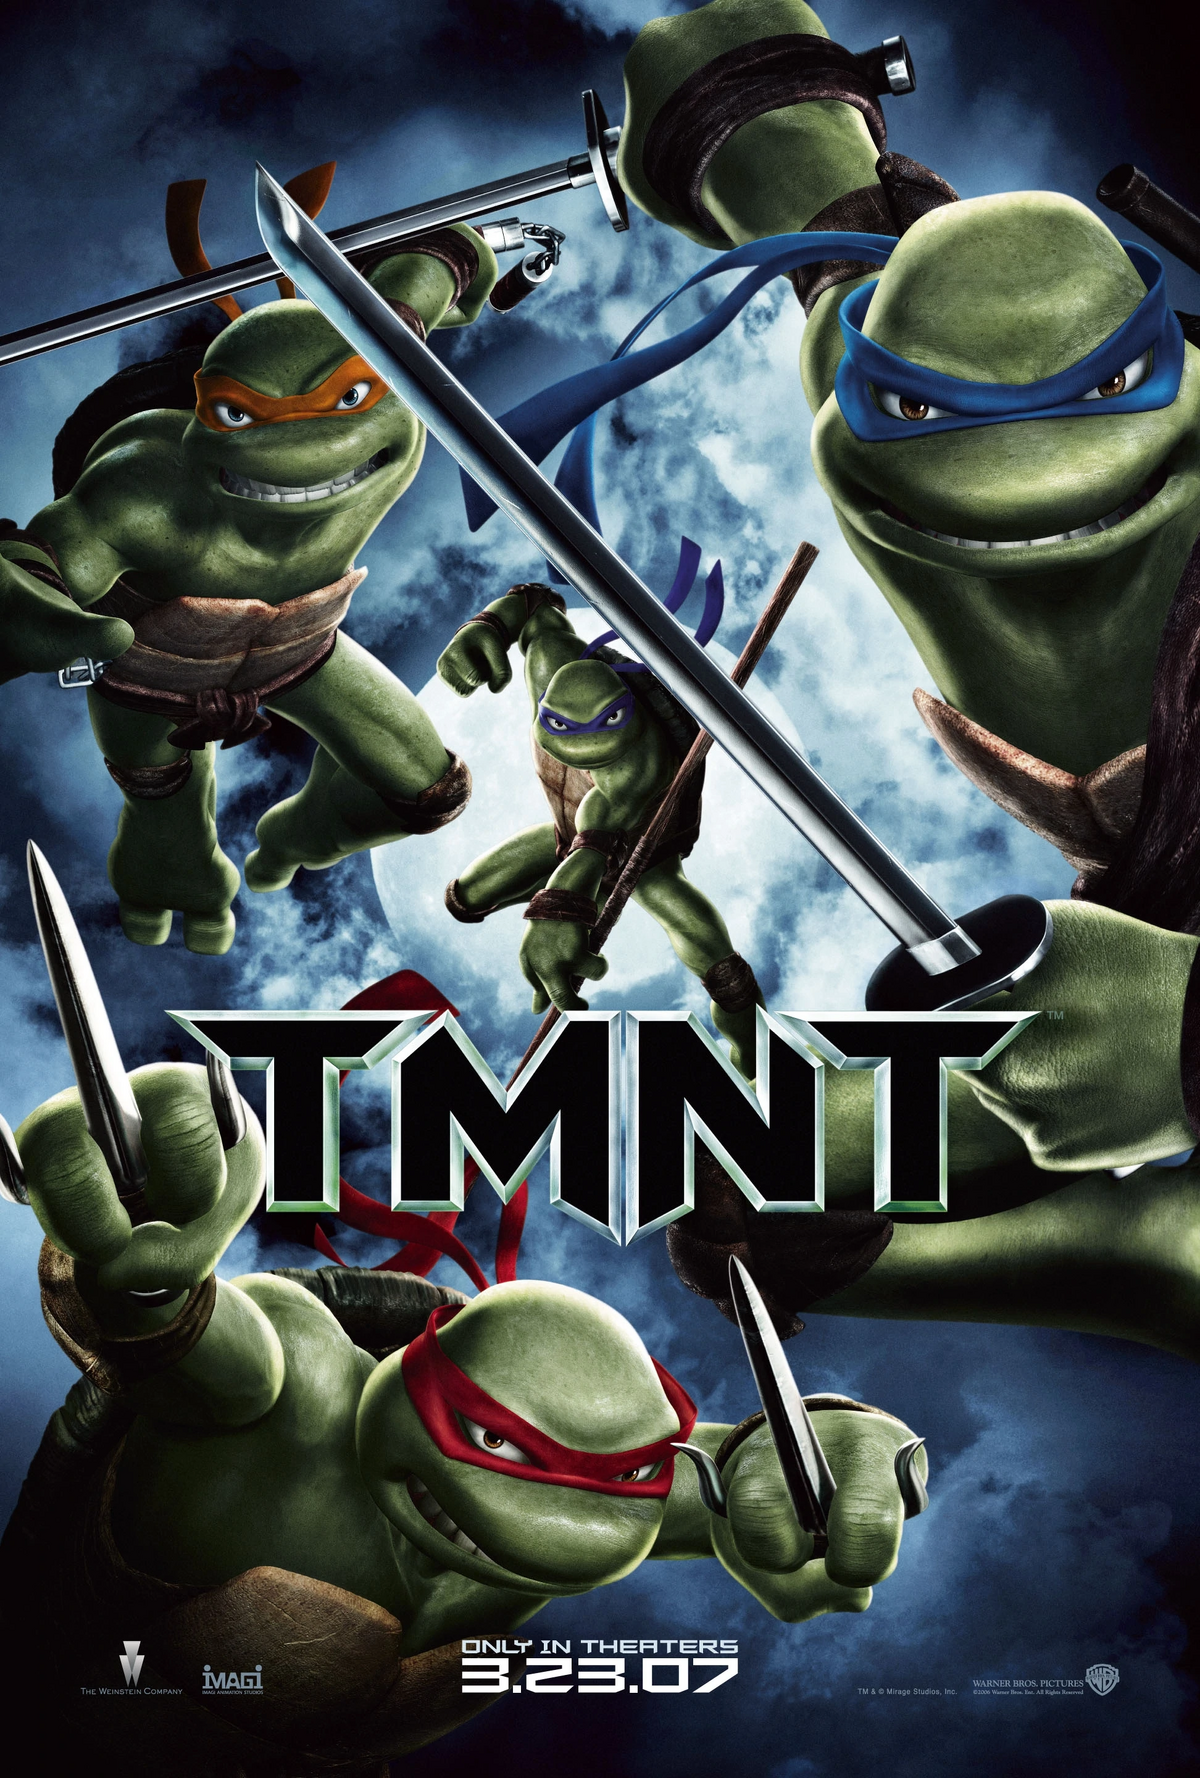 https://static.wikia.nocookie.net/doblaje/images/6/6b/TMNT2007Poster.png/revision/latest/scale-to-width-down/1200?cb=20200327231417&path-prefix=es